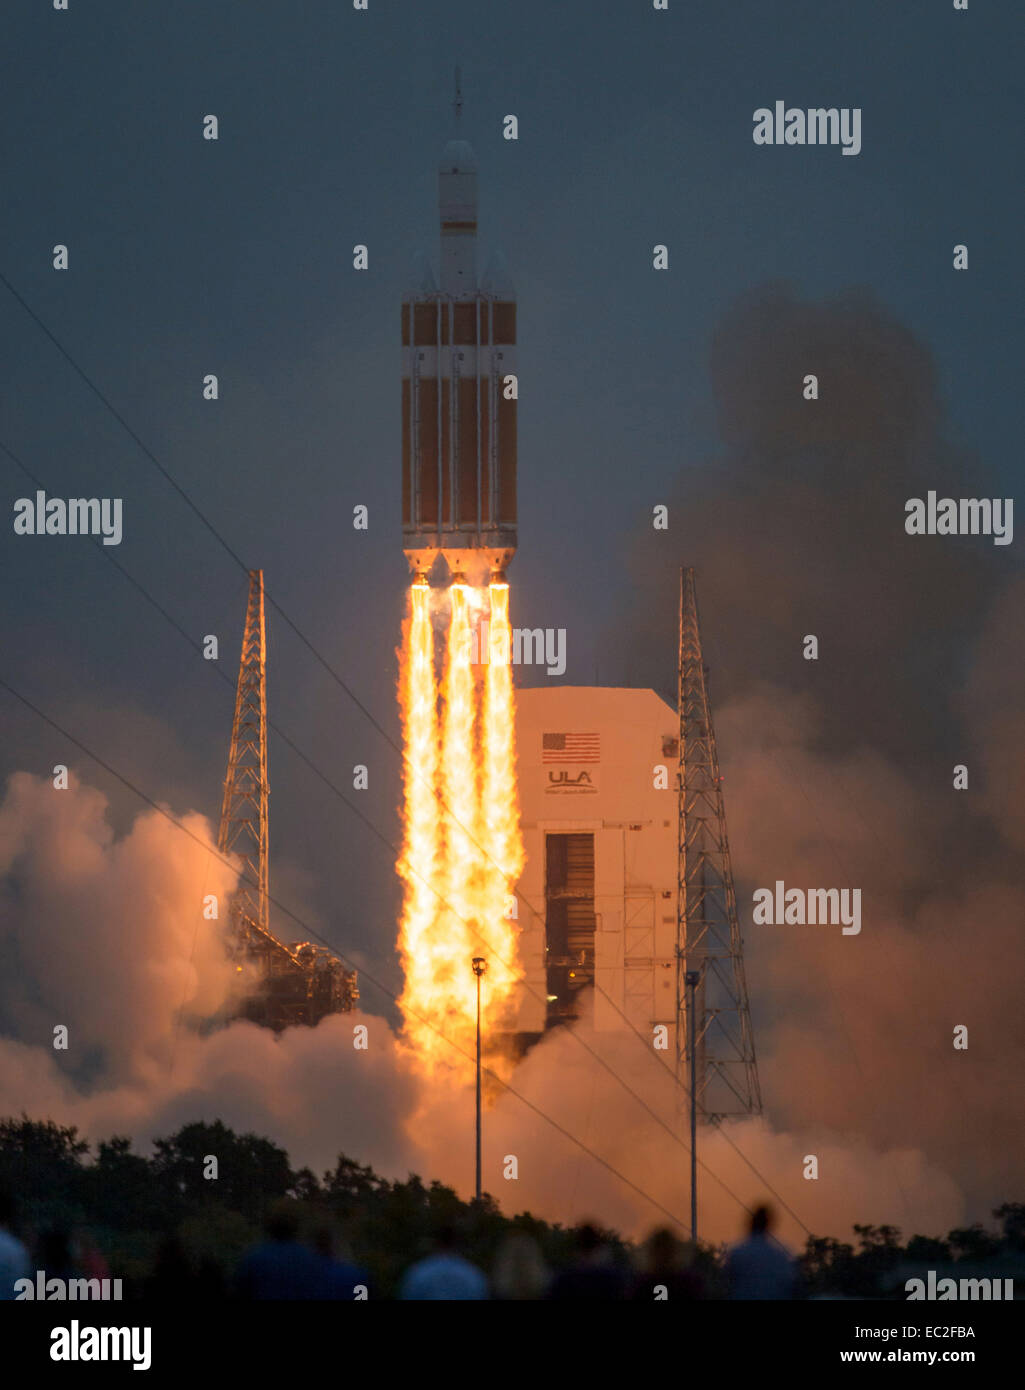 The United Launch Alliance Delta IV Heavy rocket with NASA’s Orion spacecraft mounted atop, lifts off from Cape Canaveral Air Force Station's Space Launch Complex 37 at at 7:05 a.m. EST, Friday, Dec. 5, 2014, in Florida. The Orion spacecraft will orbit Earth twice, reaching an altitude of approximately 3,600 miles above Earth before landing in the Pacific Ocean. No one is aboard Orion for this flight test, but the spacecraft is designed to allow us to journey to destinations never before visited by humans, including an asteroid and Mars. Photo credit: (NASA/Bill Ingalls) Stock Photo